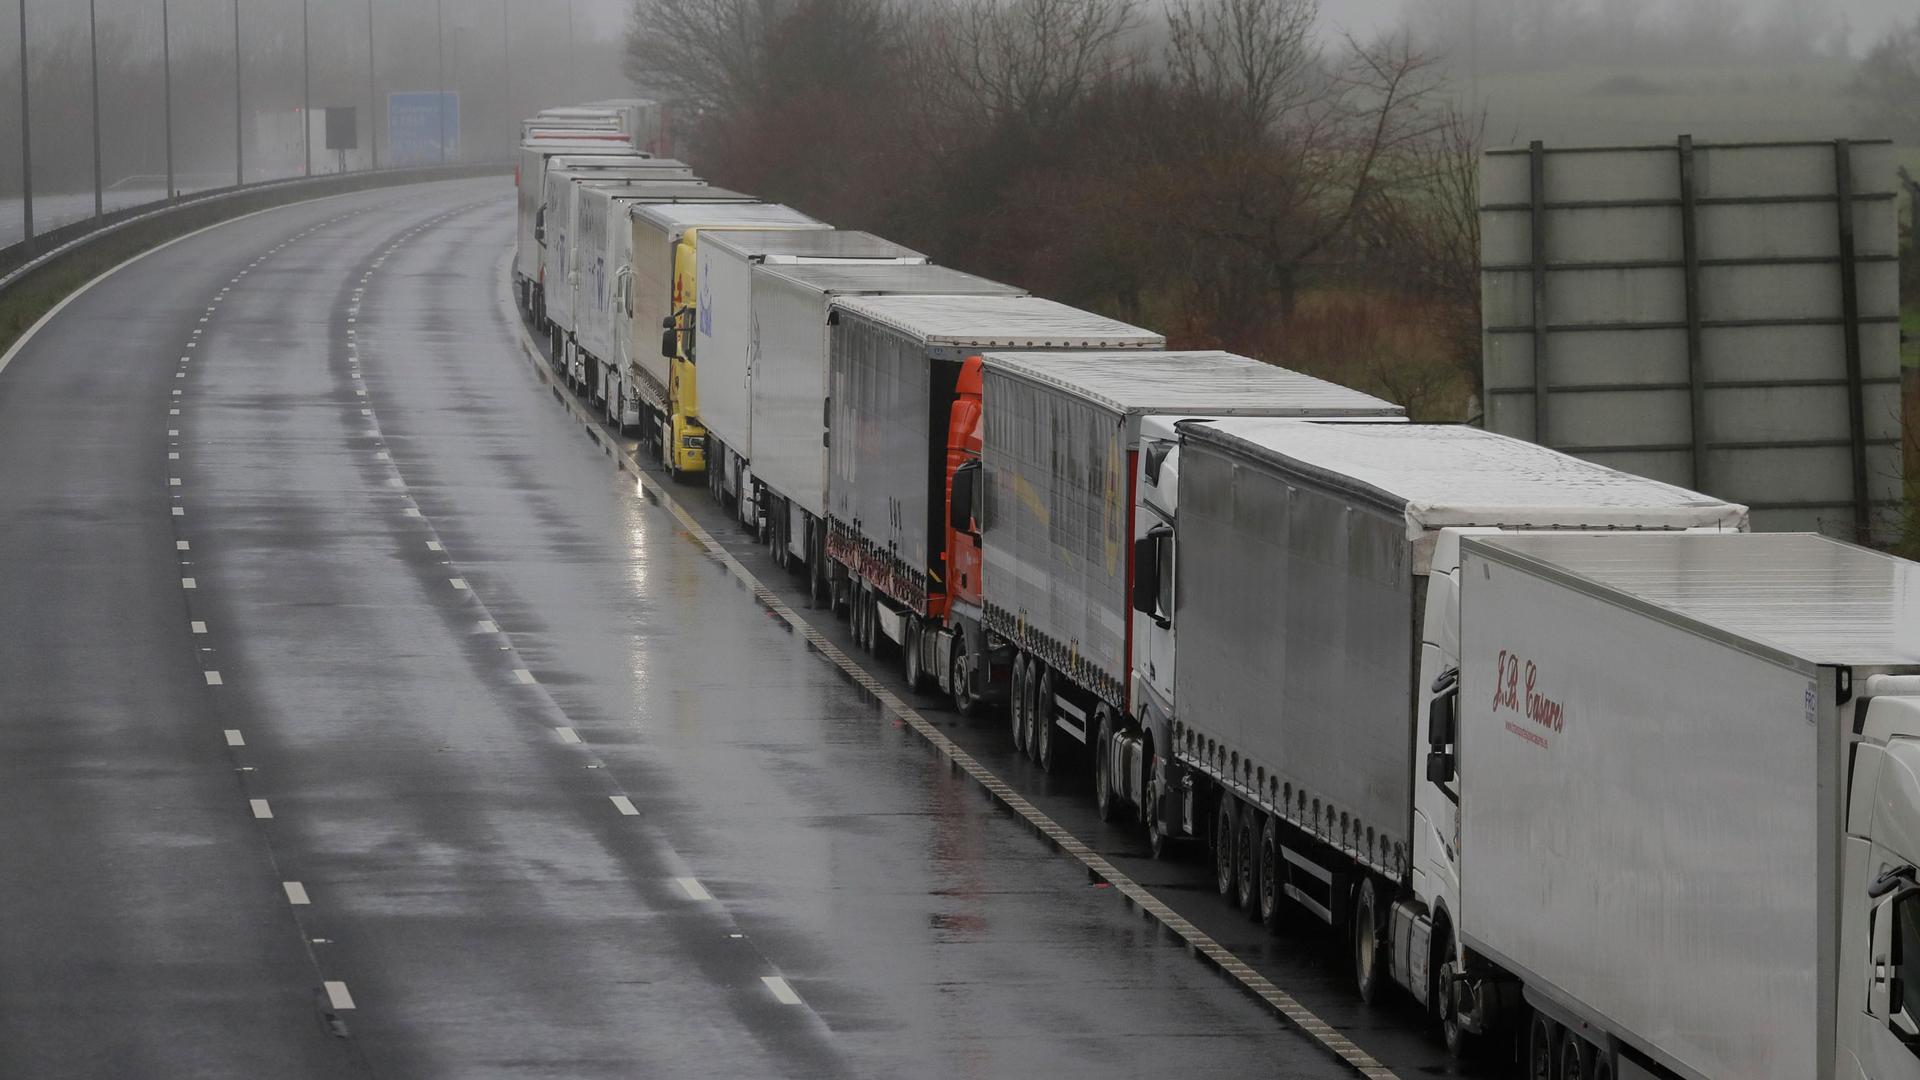 A long line of semi-trucks are shown bumper to bumper on a highway on an overcast day.